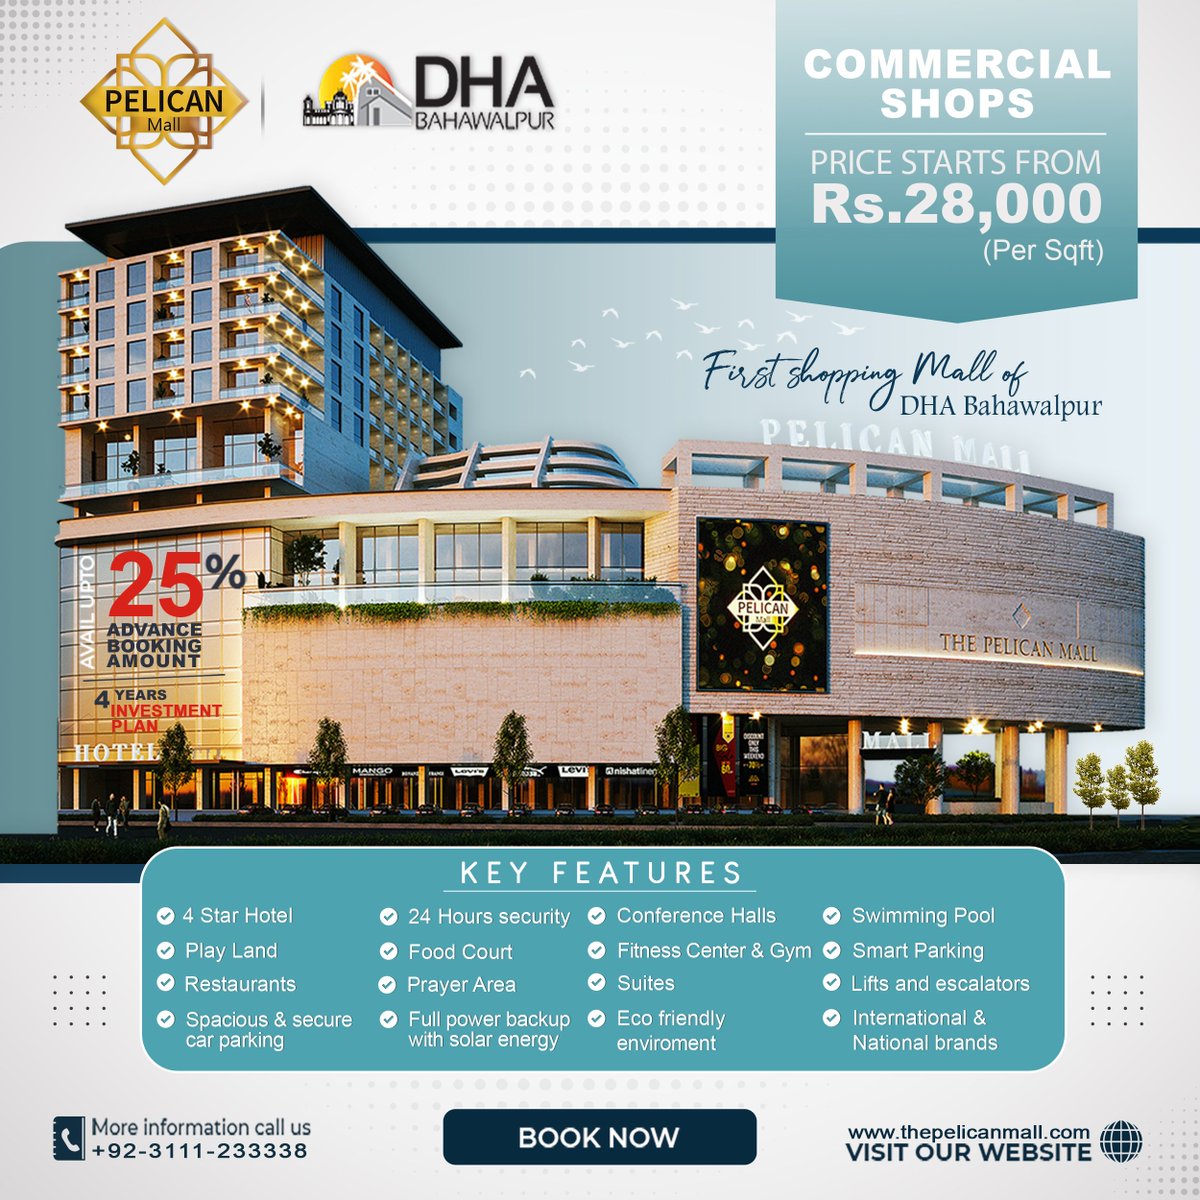 𝐅𝐢𝐫𝐬𝐭 𝐒𝐡𝐨𝐩𝐩𝐢𝐧𝐠 𝐌𝐚𝐥𝐥 𝐨𝐟 𝐃𝐇𝐀 𝐁𝐚𝐡𝐚𝐰𝐚𝐥𝐩𝐮𝐫
Commercial Shops: Price Starts from: RS.28,000 (per Sqft)
#pelicanmall #dhabahwalpur #shoppingcenter #commercialrealestate